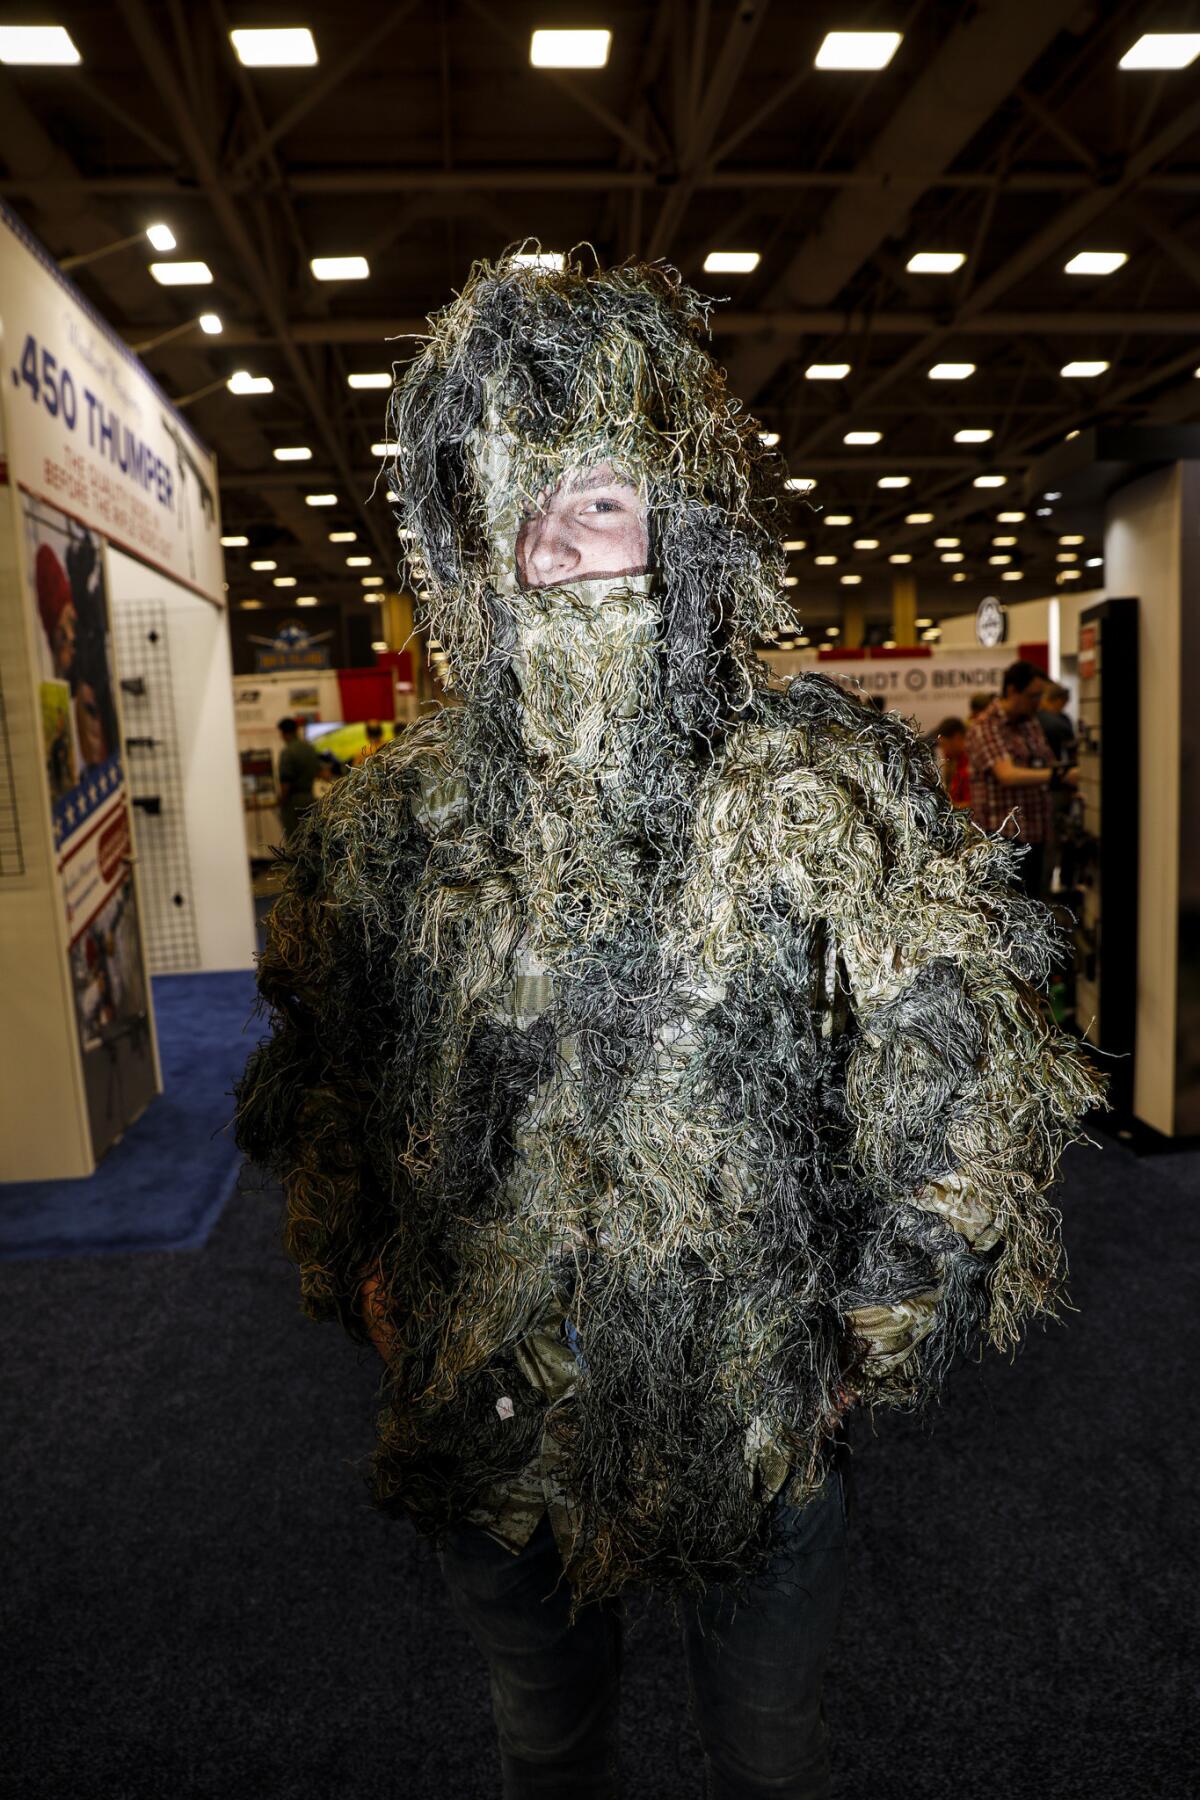 John Mikesell, 16, of Pittsburgh wears a ghillie suit, often used during hunting, while walking around the exhibition floor at the NRA meeting in Dallas.